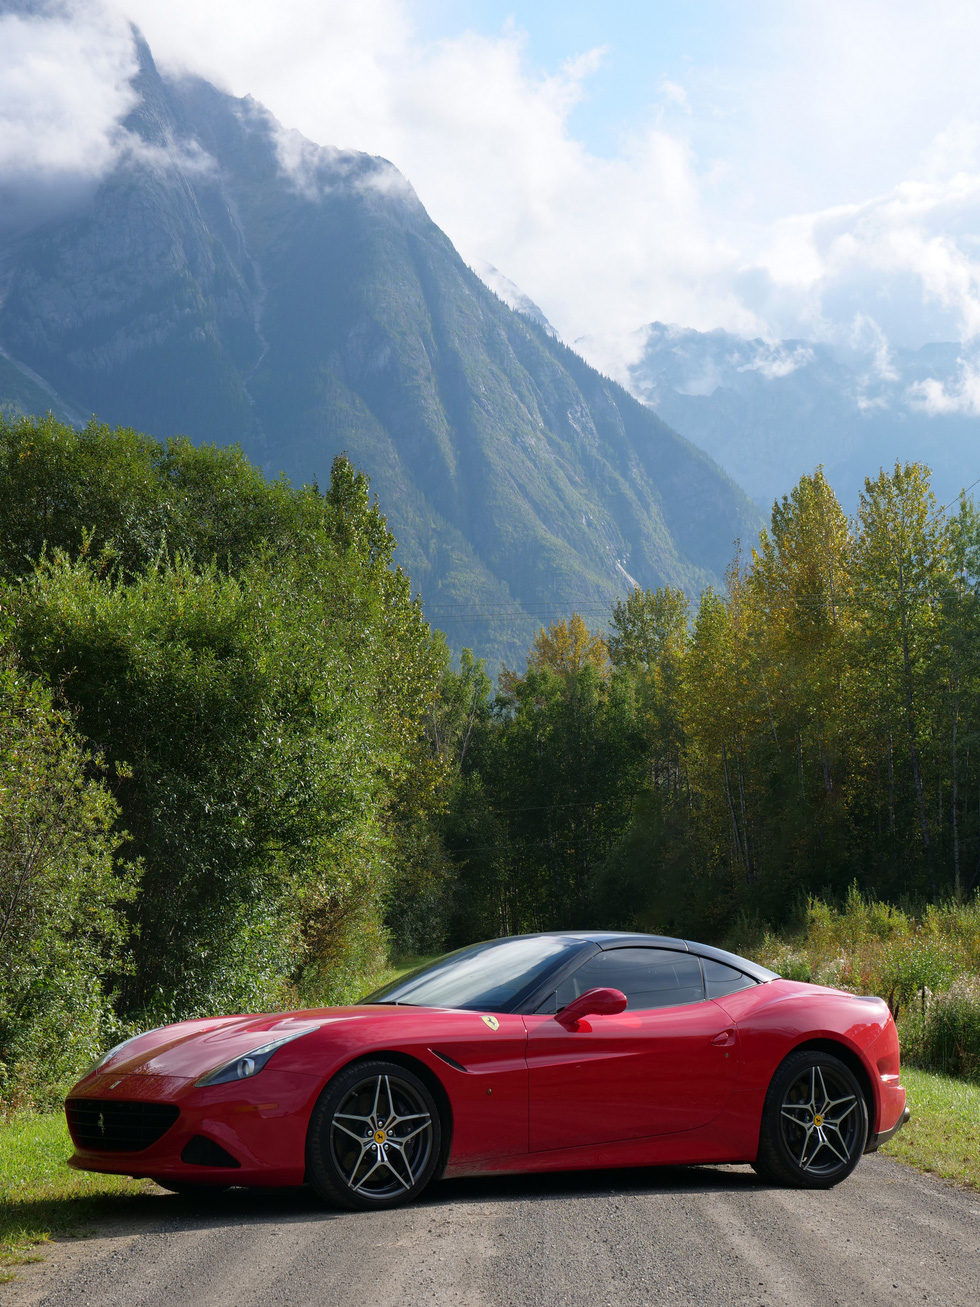 Traveling through 3 countries with a Ferrari supercar: Traveled nearly 21,000km in 2 months - Photo 5.